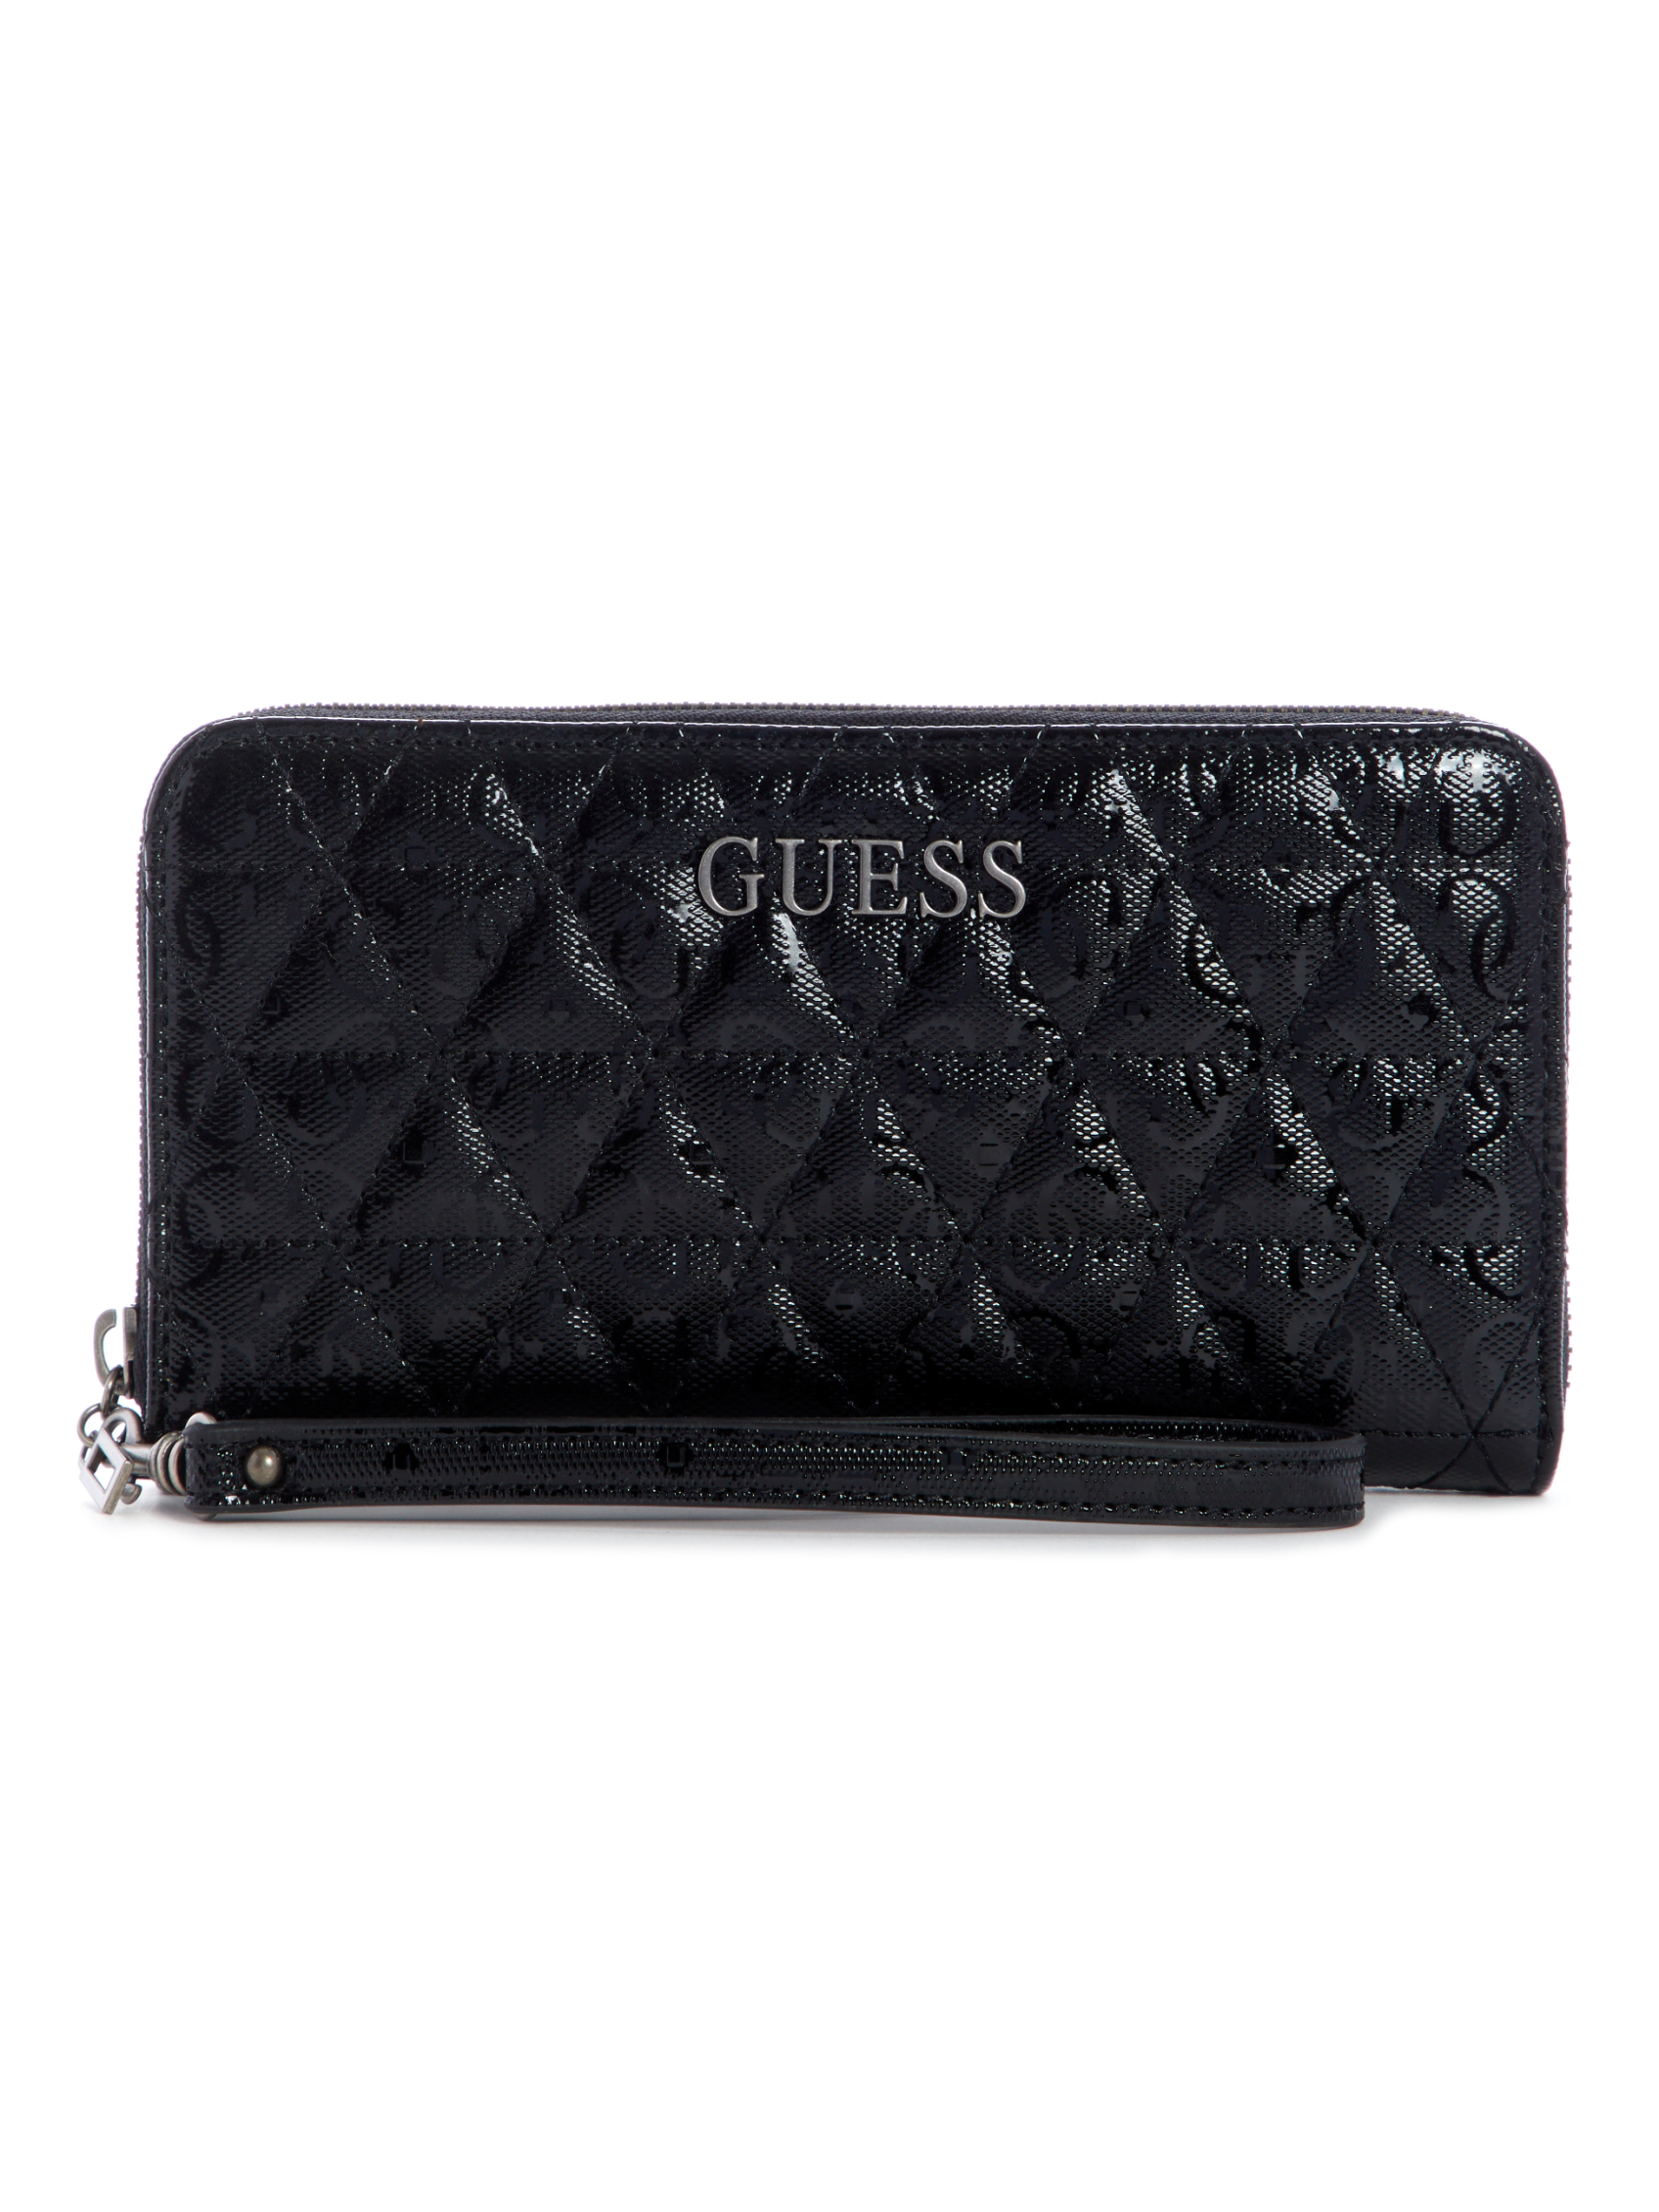 WESSEX SLG LARGE ZIP AROUND | Guess Philippines